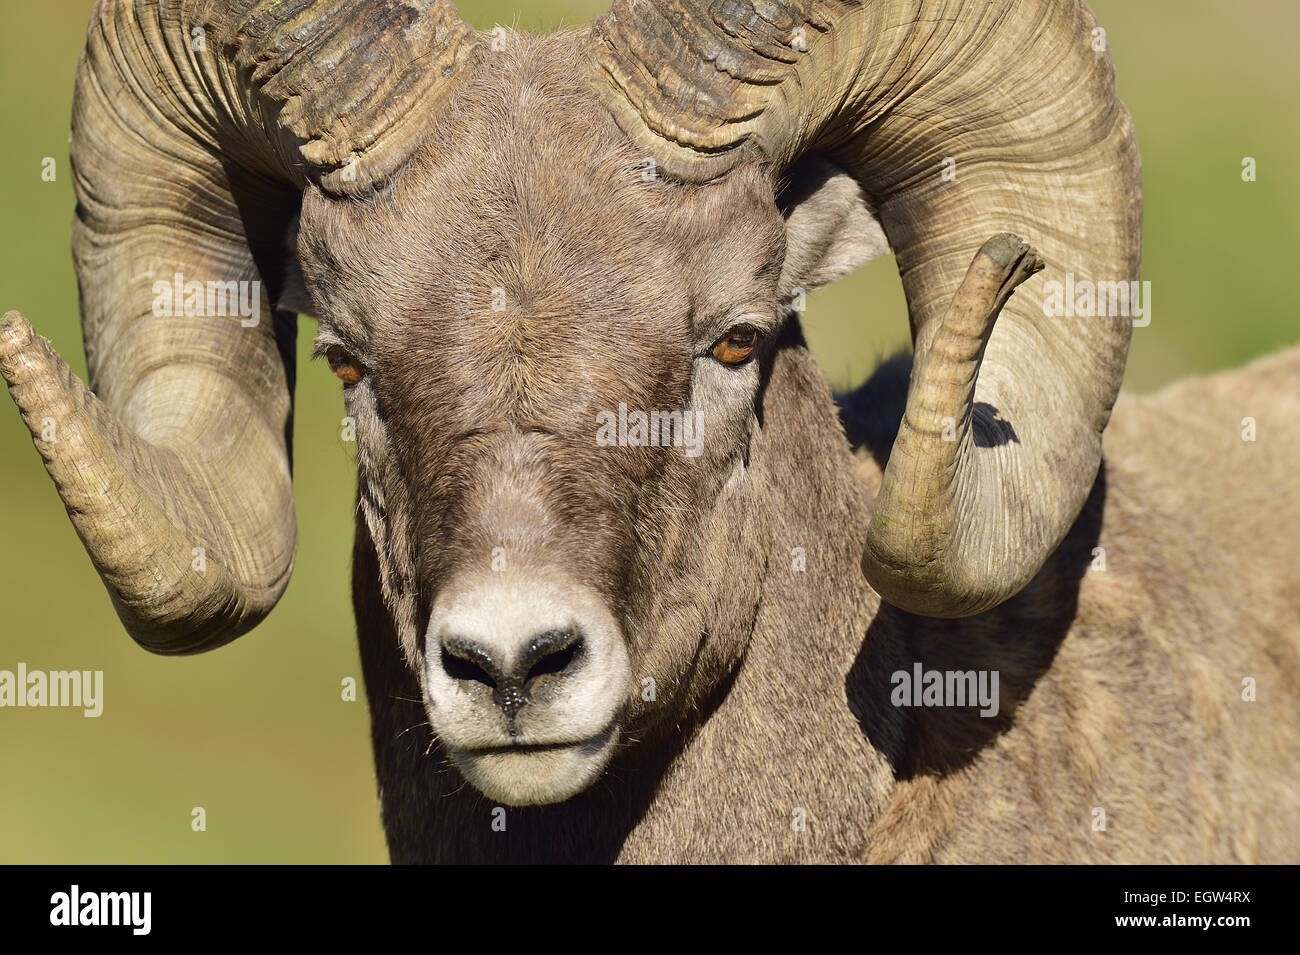 A close up portrait view of a bighorn ram  Orvis canadensis, taken in fall sunlight. Stock Photo